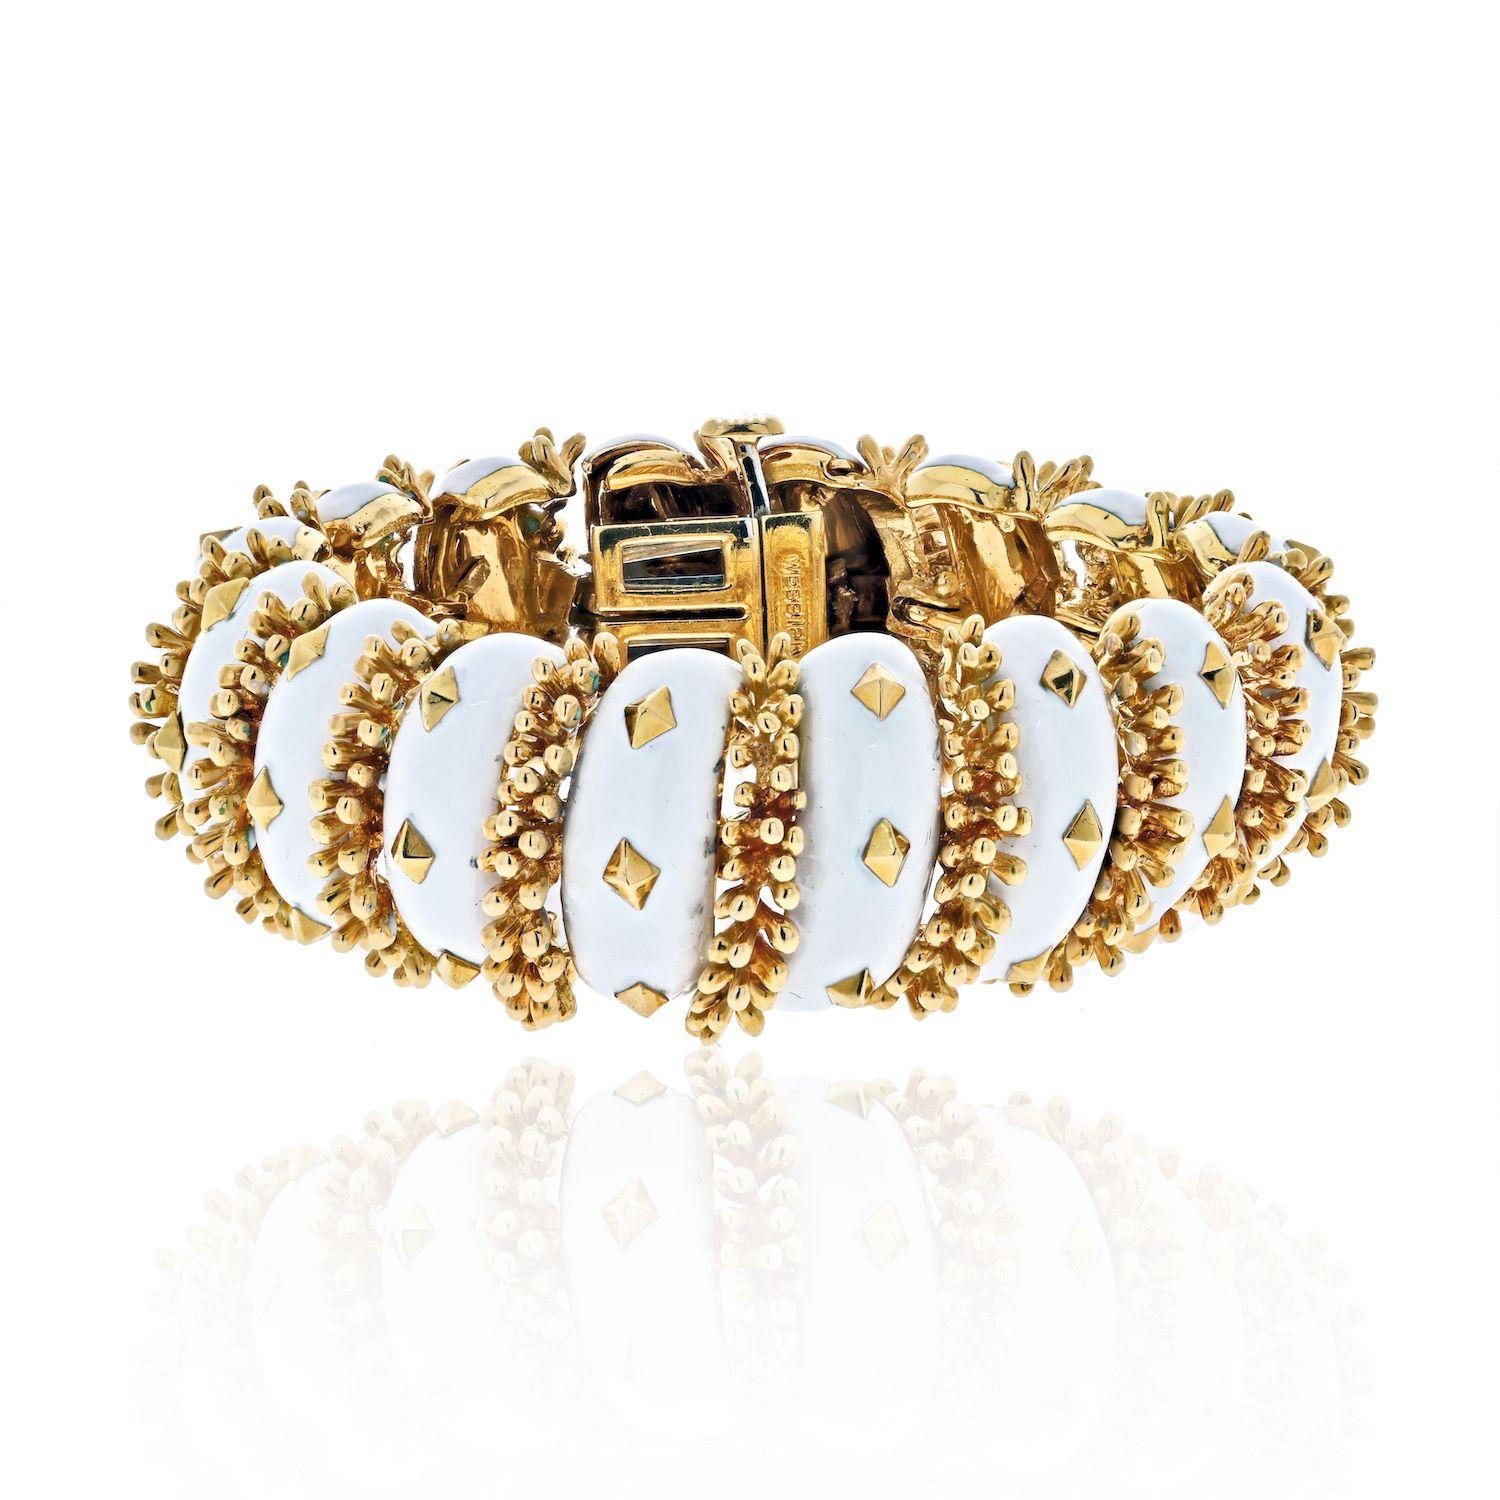 Articulated white enamel and gold accented flexible bracelet by David Webb. Lustrous white enamel alternates with 18K yellow gold this bracelet is artfully decorated with gold accents all throughout. 
Make this your go to bracelet when you are out